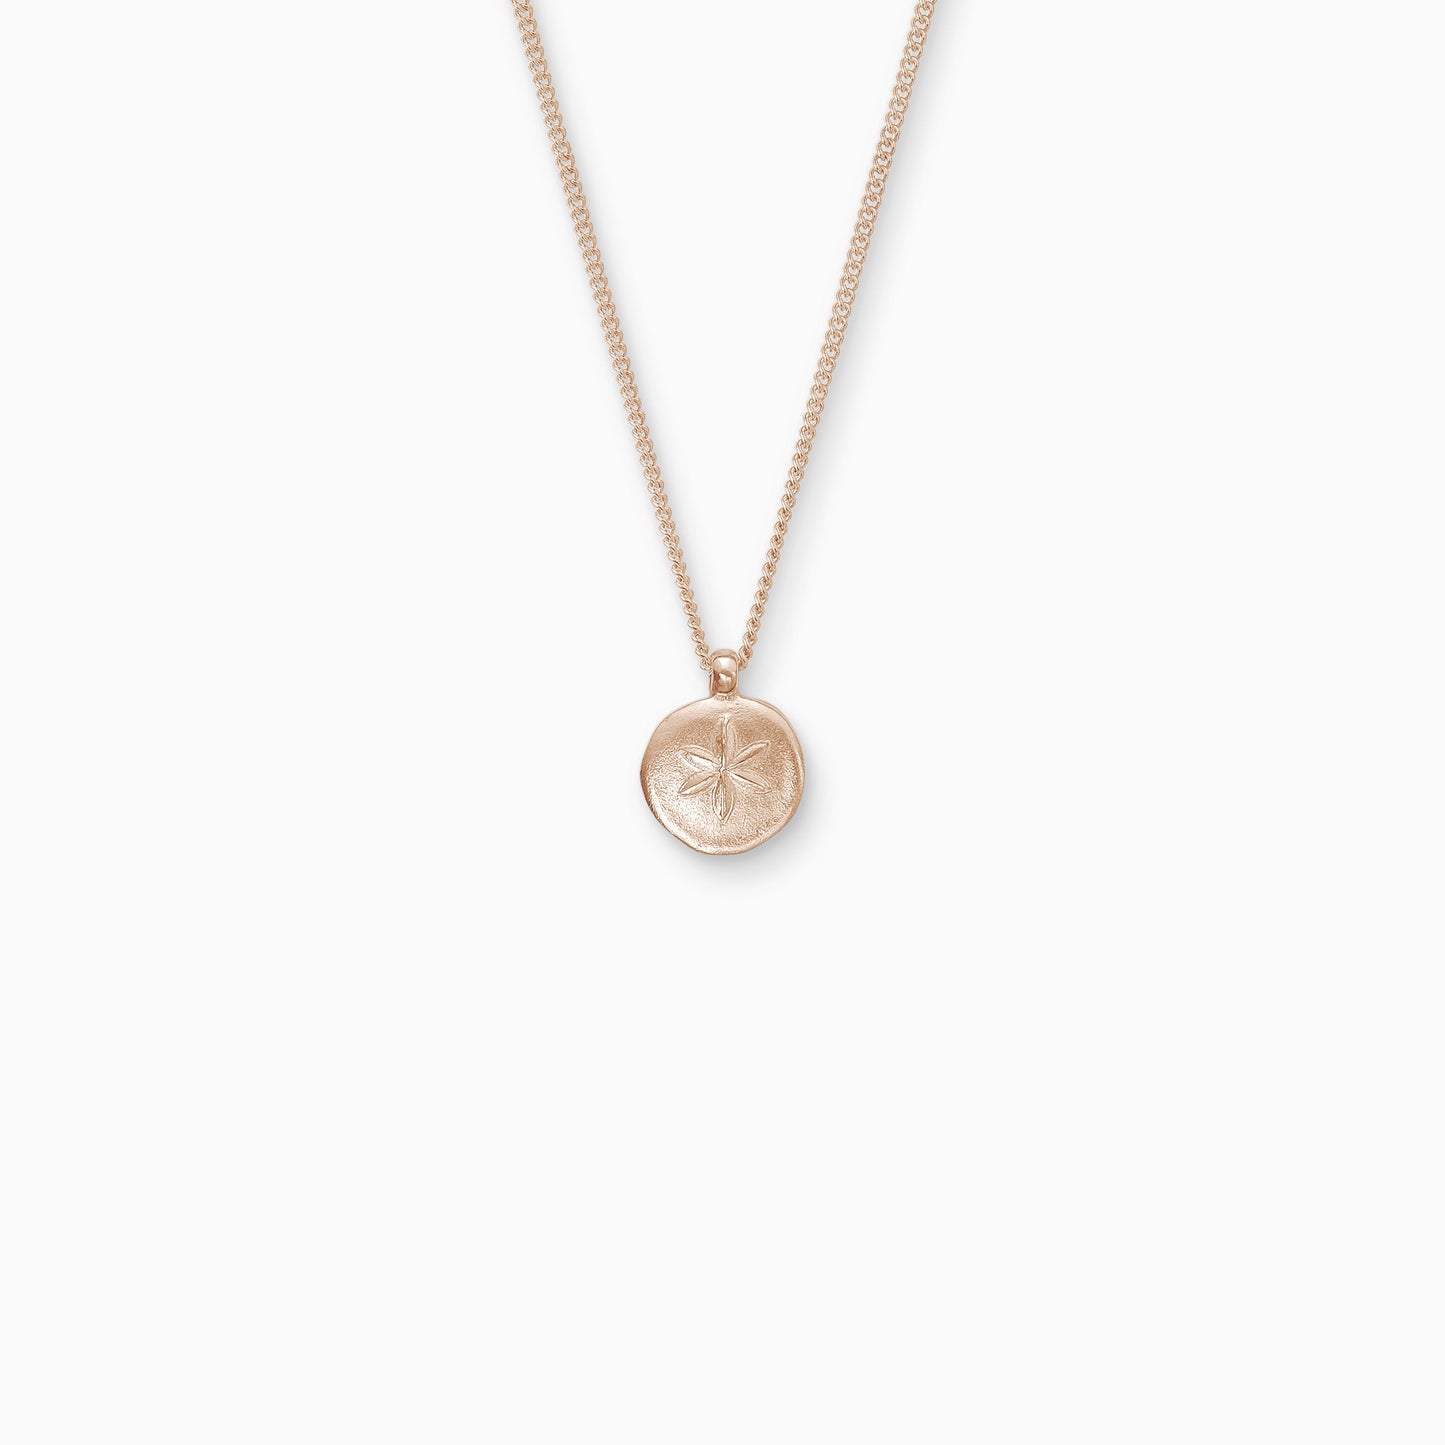 Theia necklace